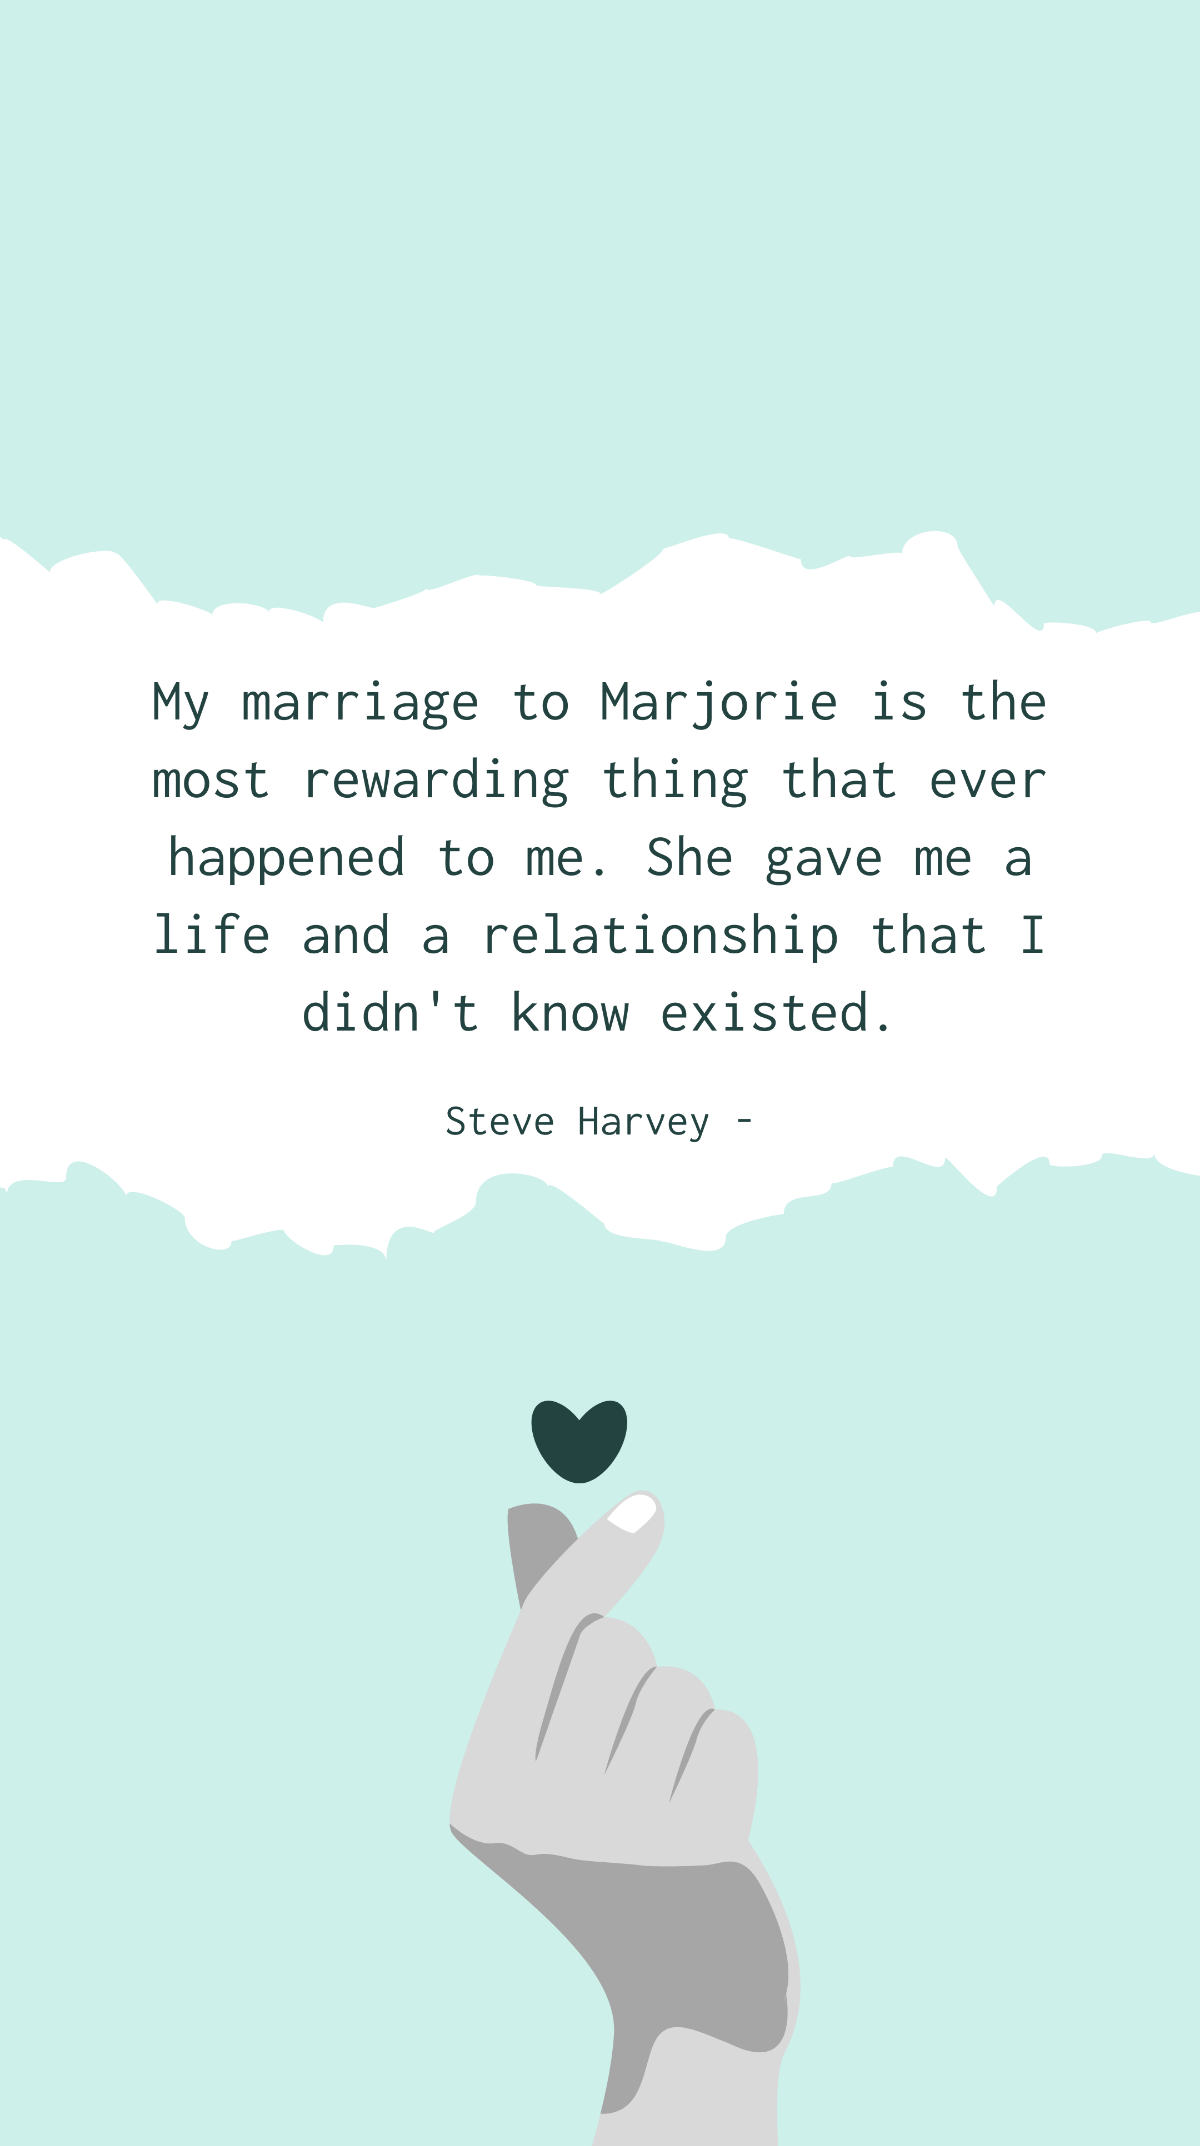 Steve Harvey - My marriage to Marjorie is the most rewarding thing that ever happened to me. She gave me a life and a relationship that I didn't know existed. Template